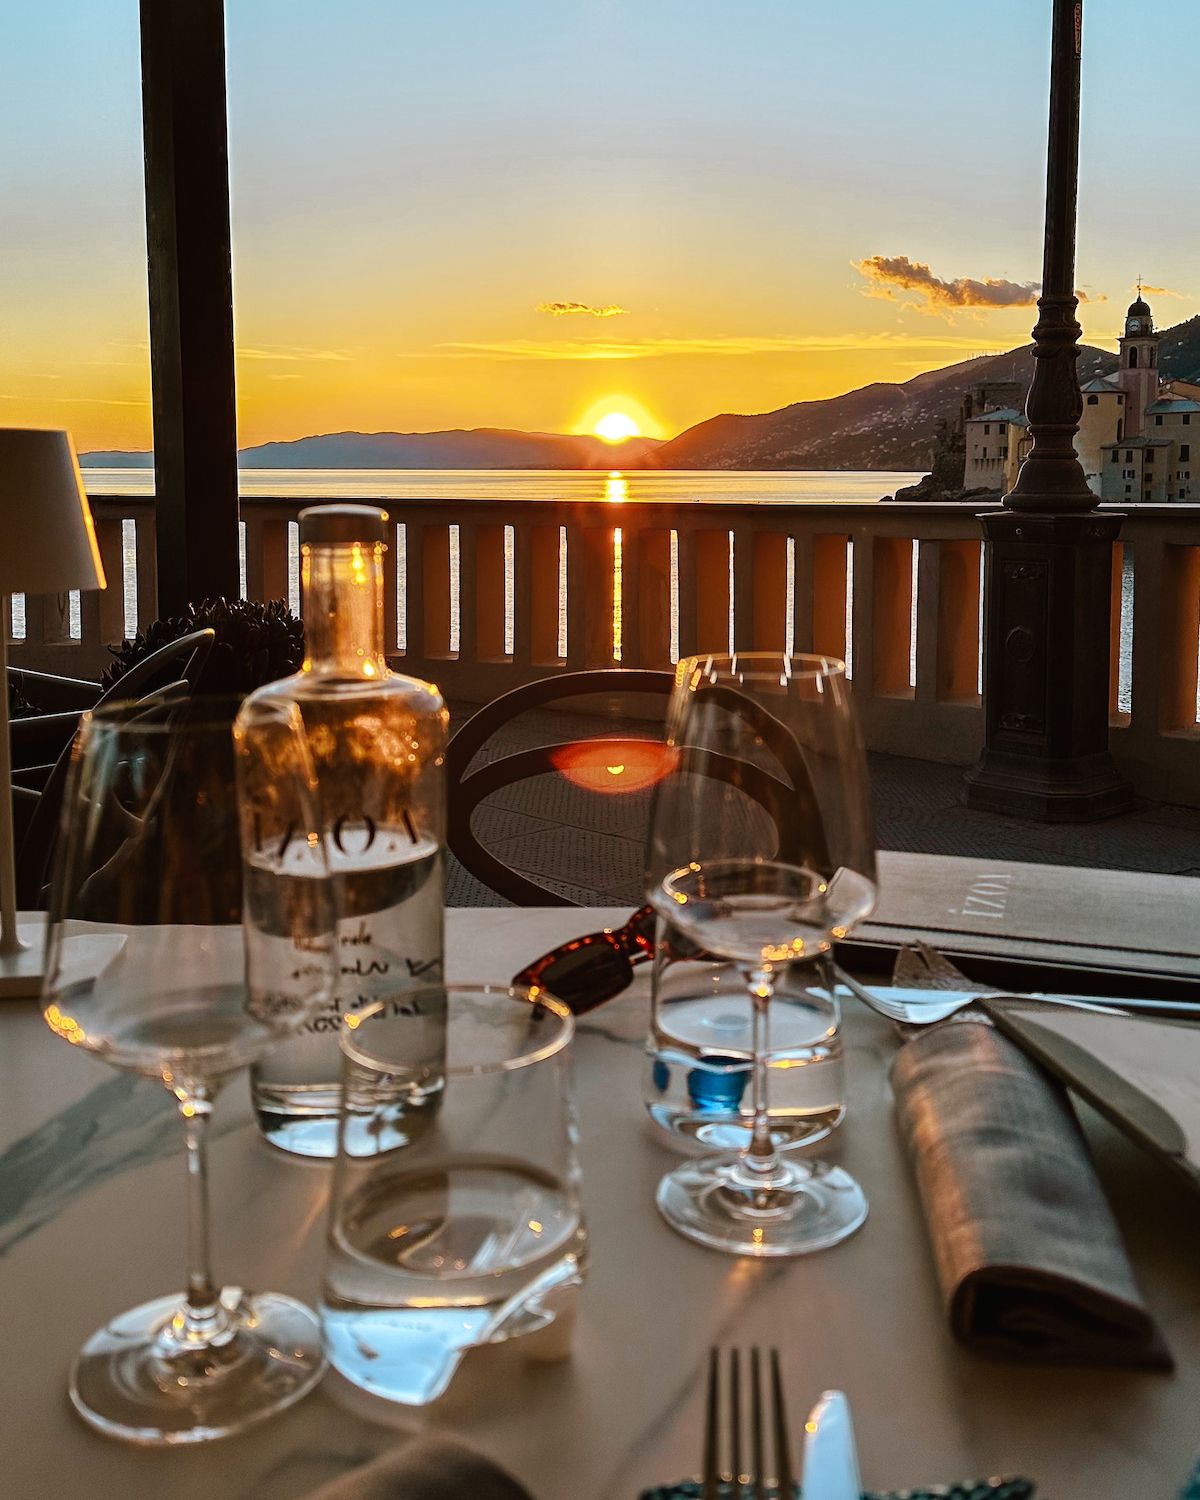 The sunset hitting an outdoor dining table on the beachfront in Camogli